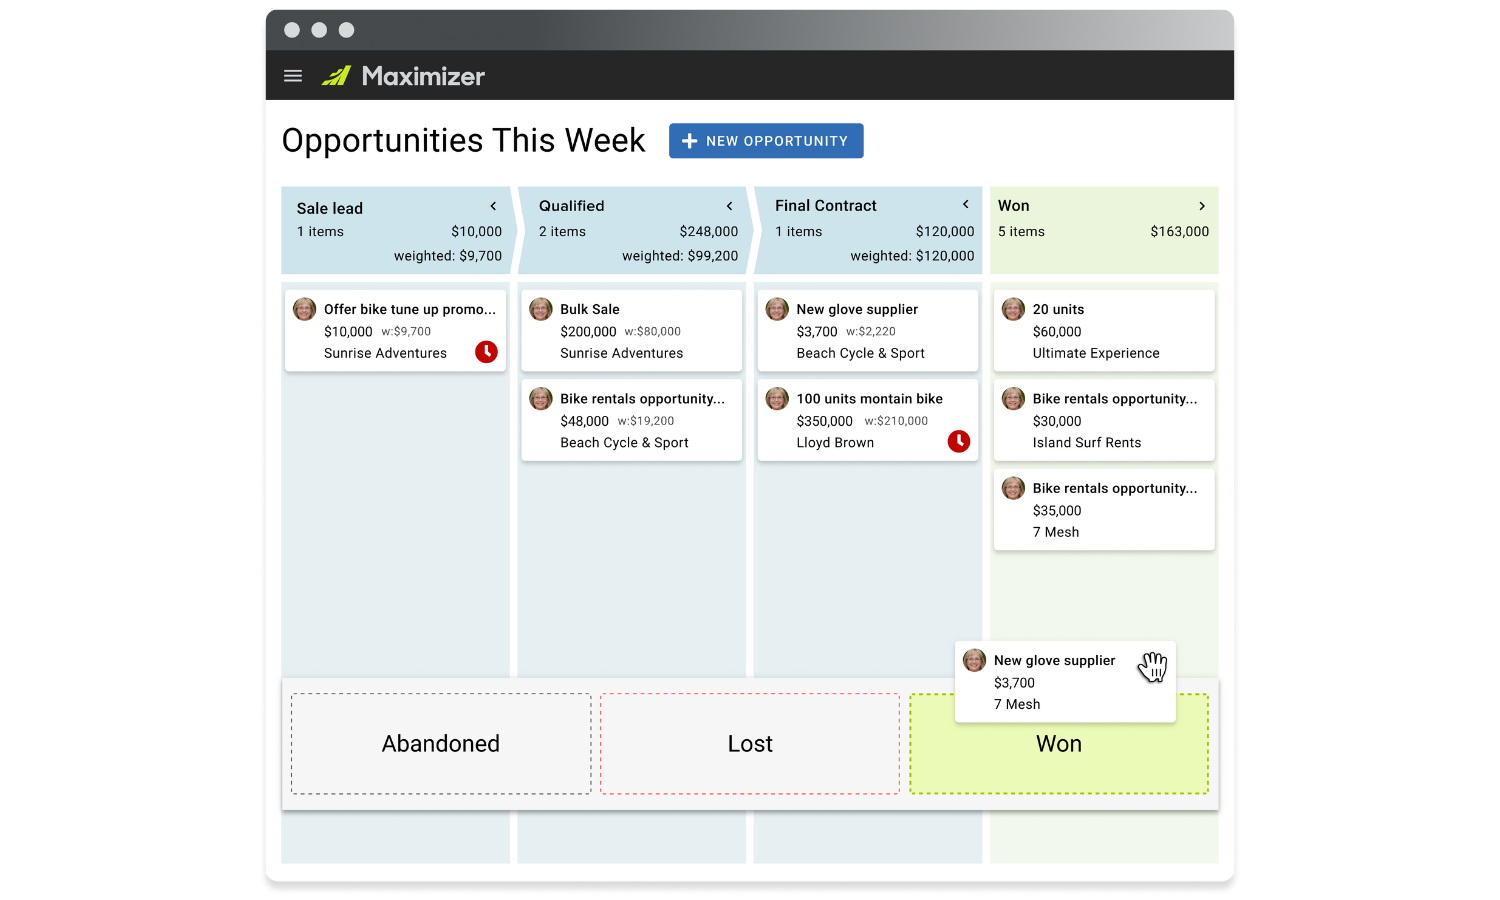 Maximizer CRM Software - Opportunities Viewer shows all opportunities in the company funnel, dives into pipeline activity and progress for individual reps, and continually fine-tunes strategic direction based on trends.